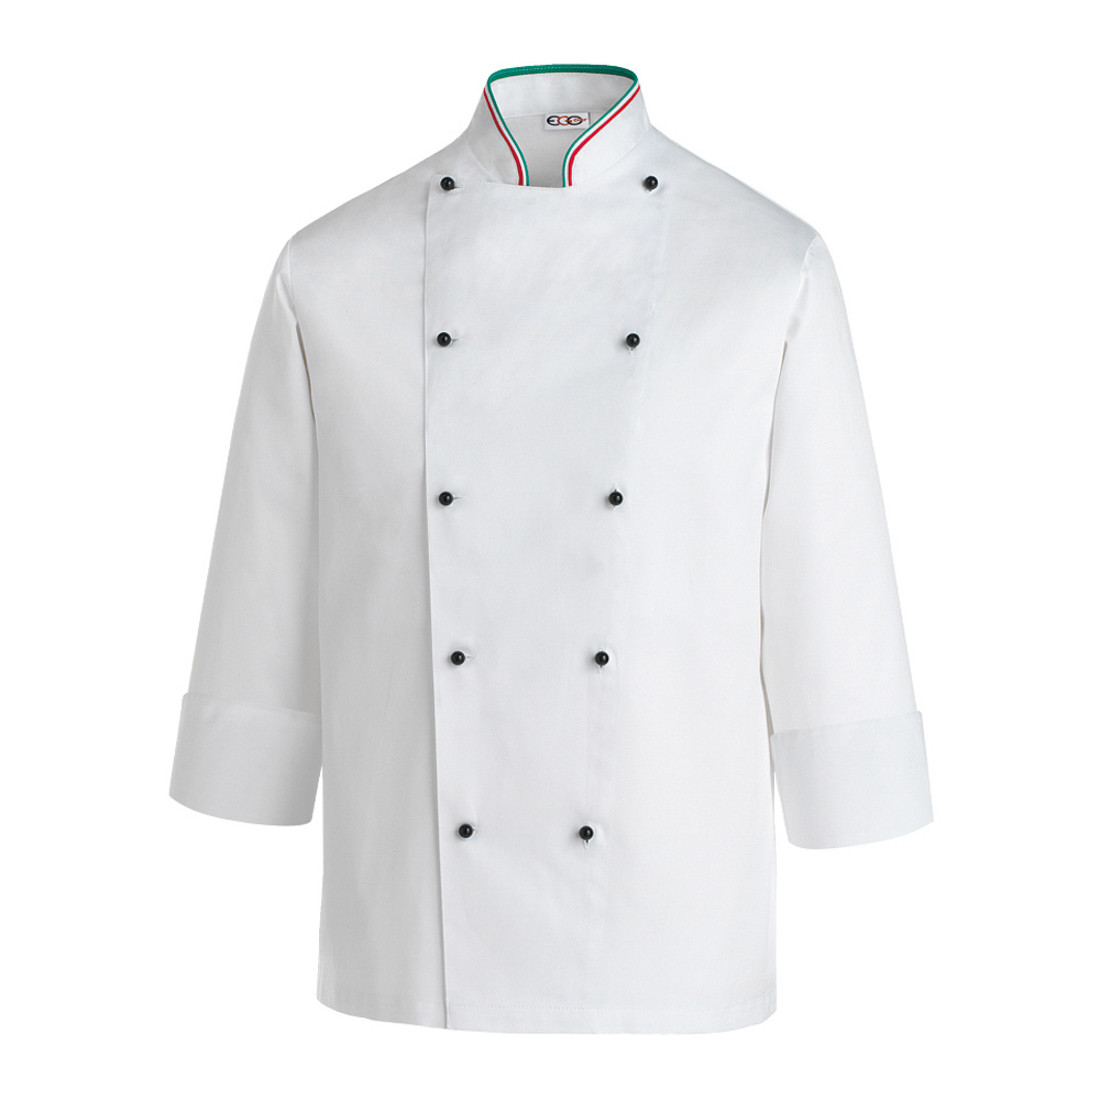 Security Italy Chef's Jacket - Safetywear